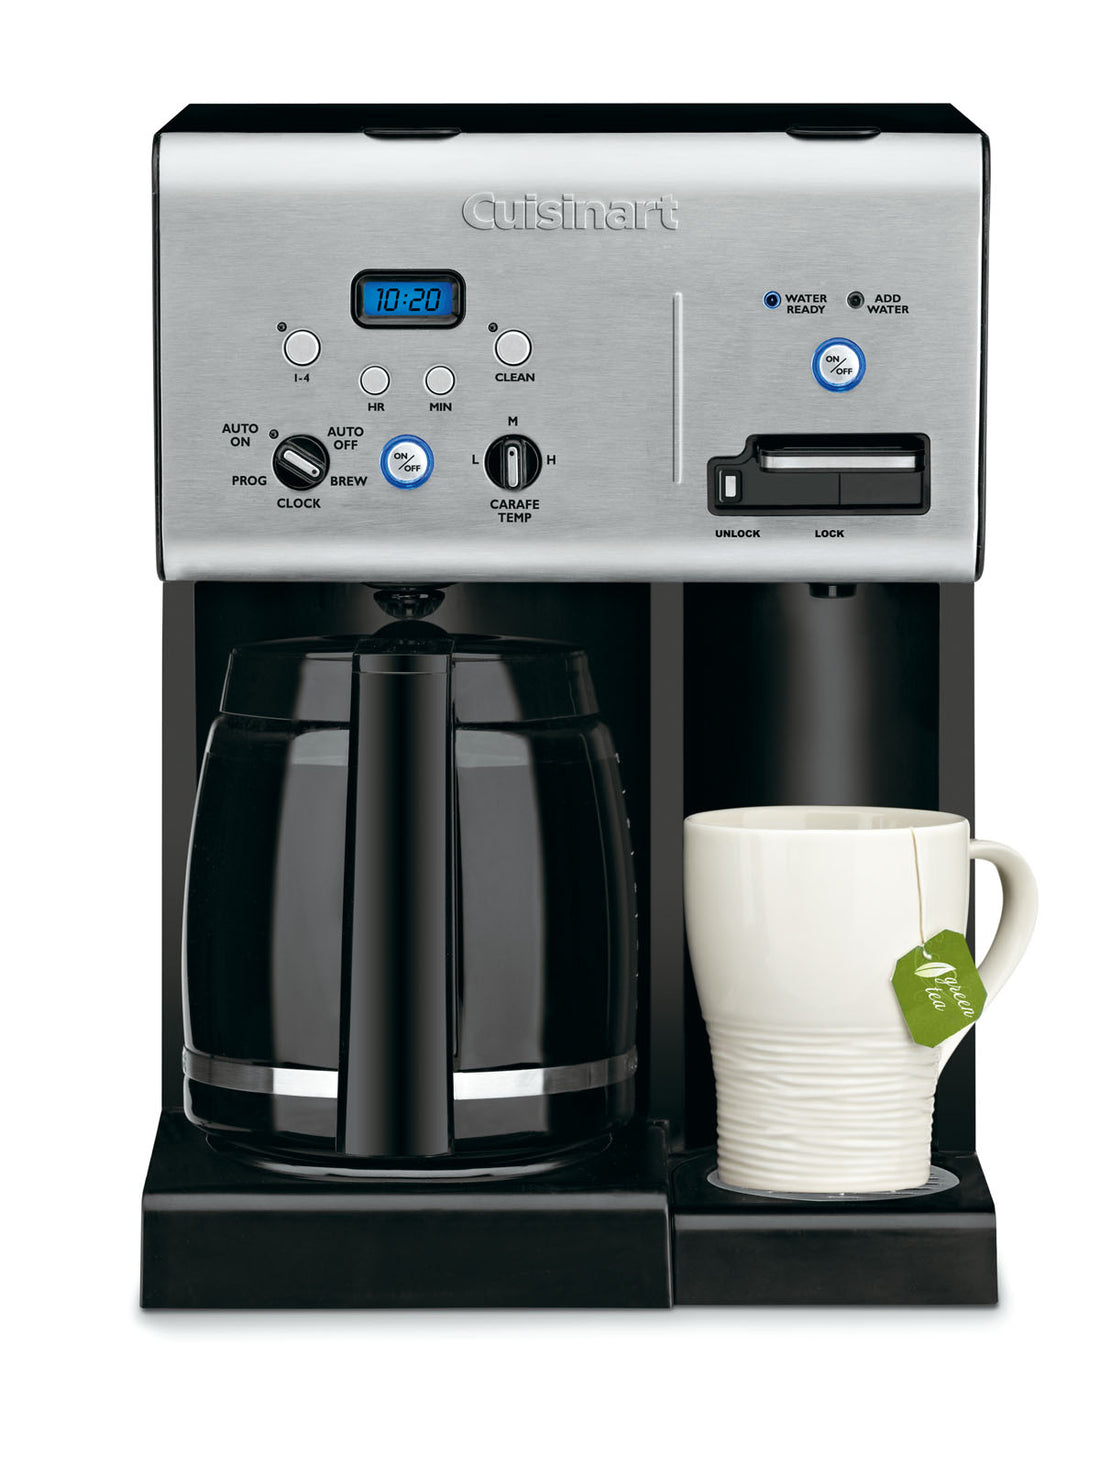 Best Thermal Carafe Coffee Makers Reviews (2020 Buyers Guide)